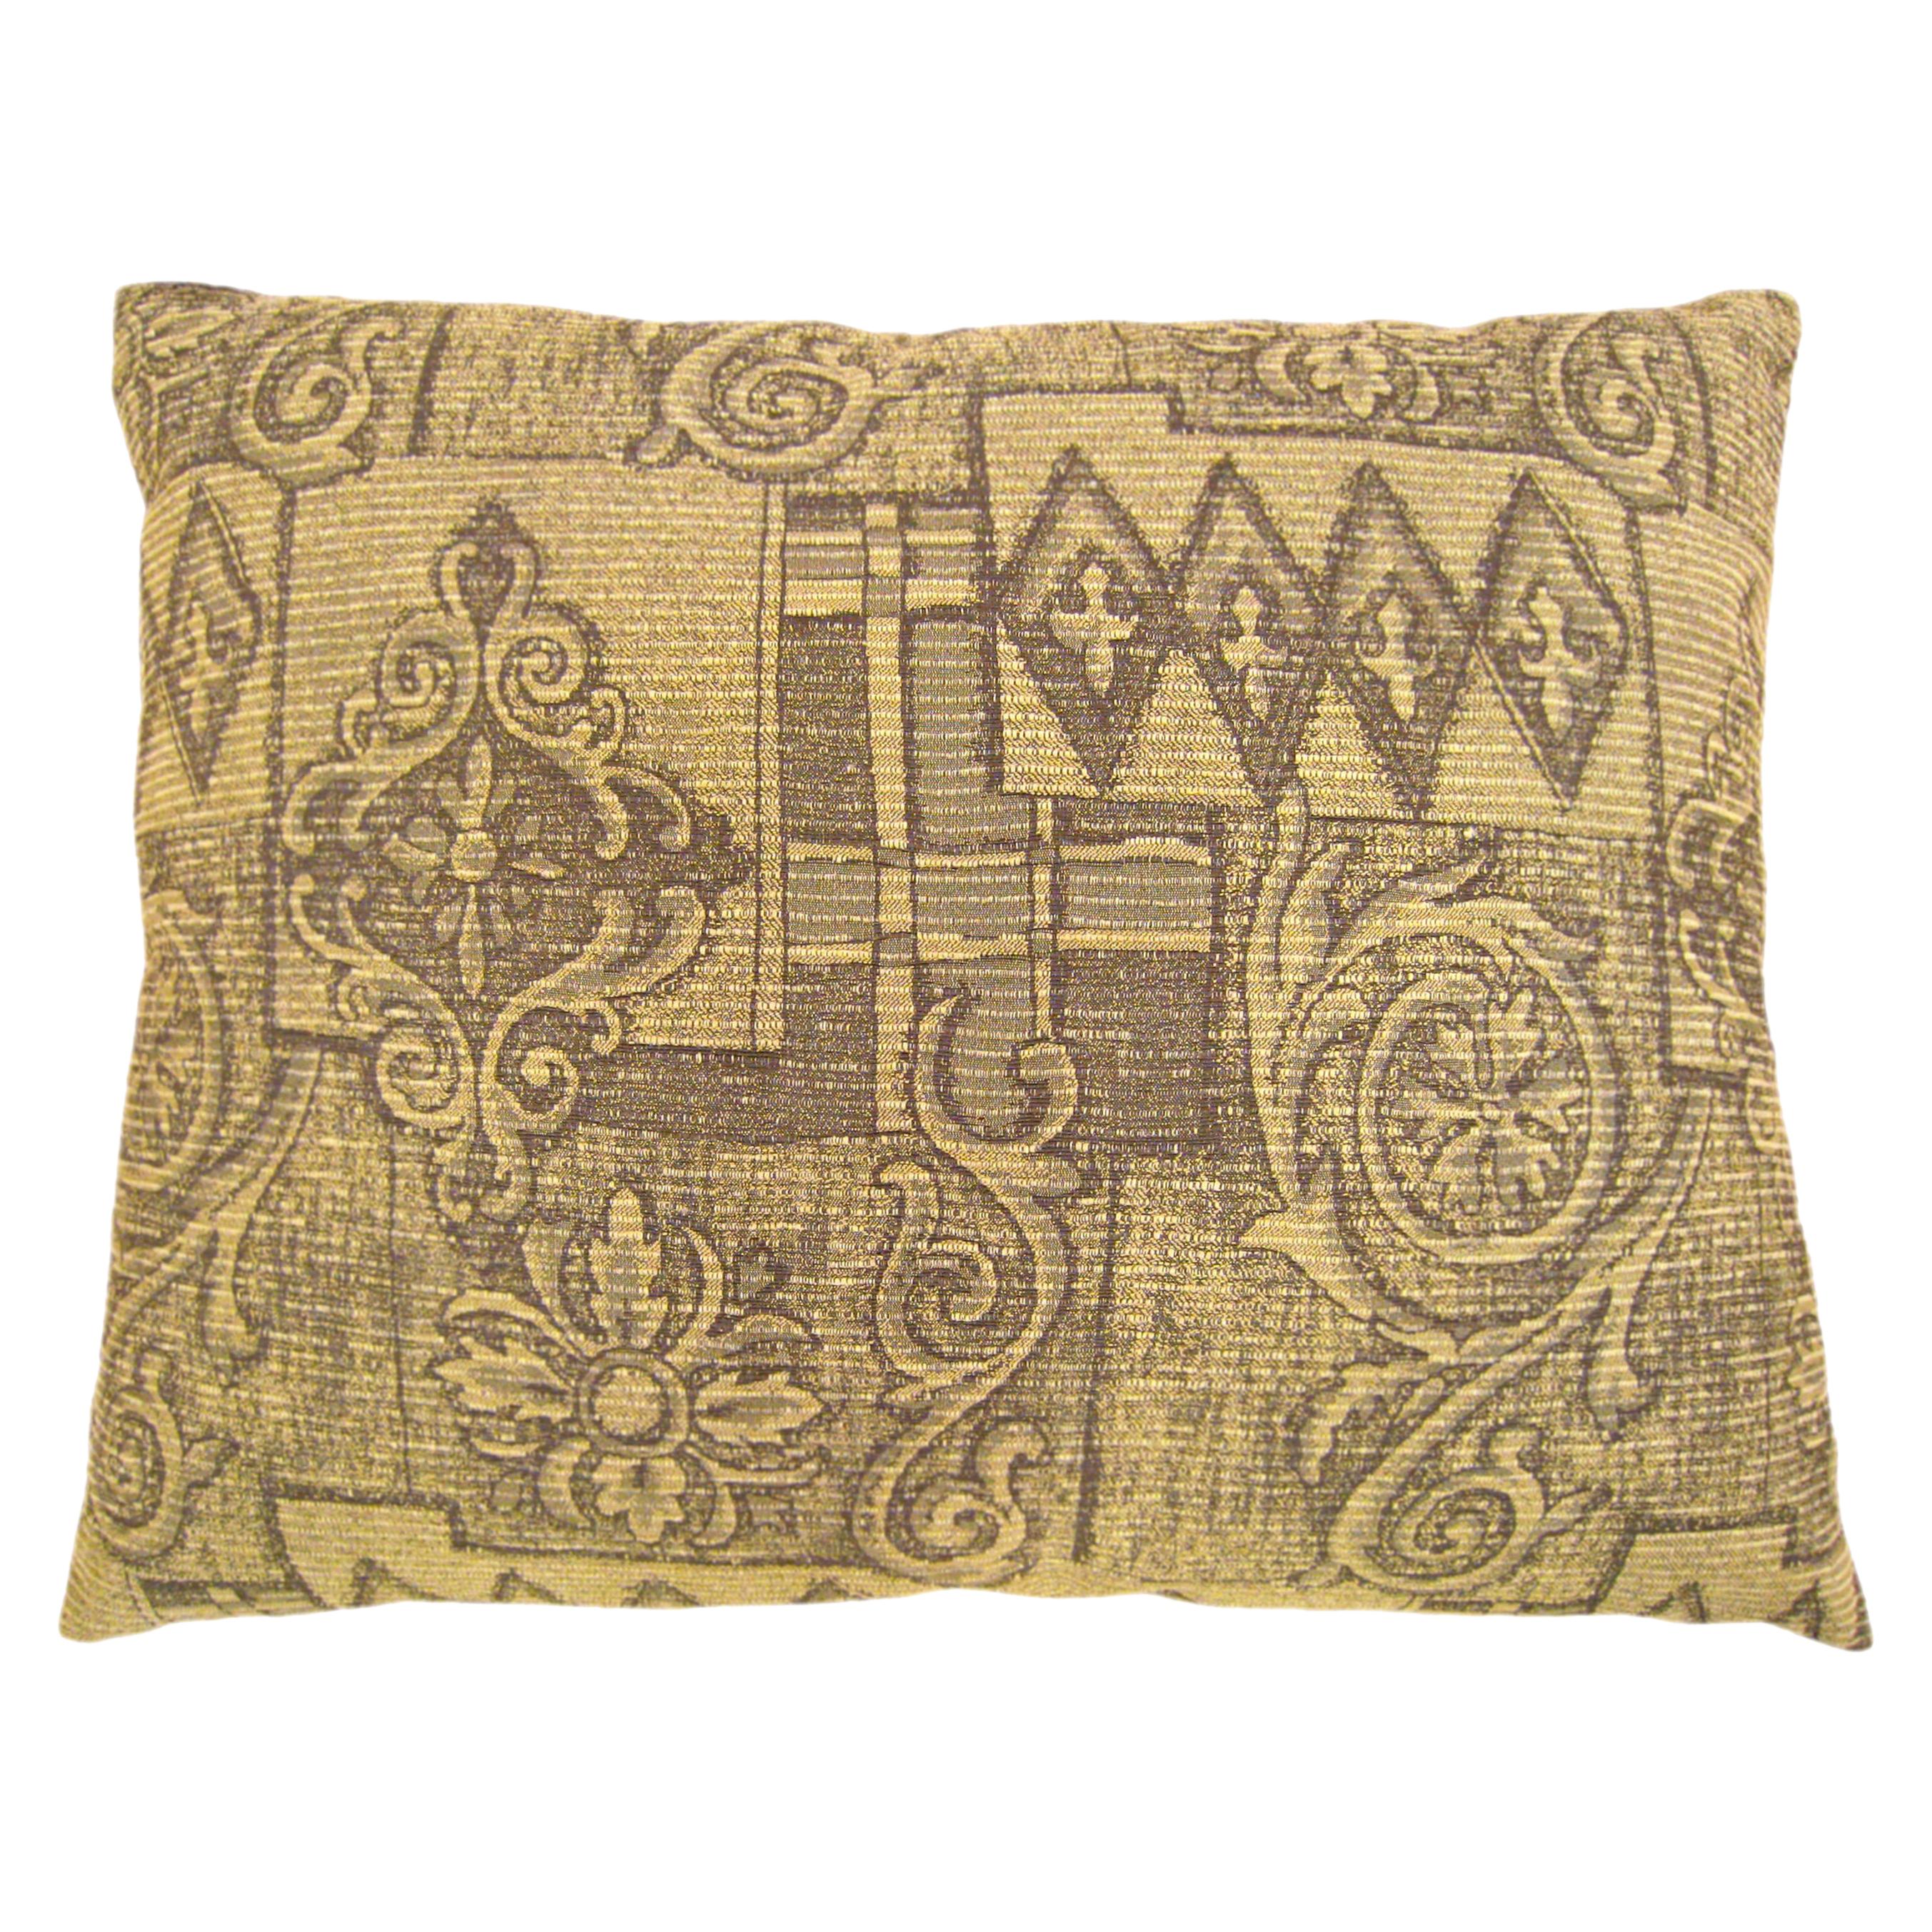 Vintage Decorative Pillow with a Directional Floral Pattern